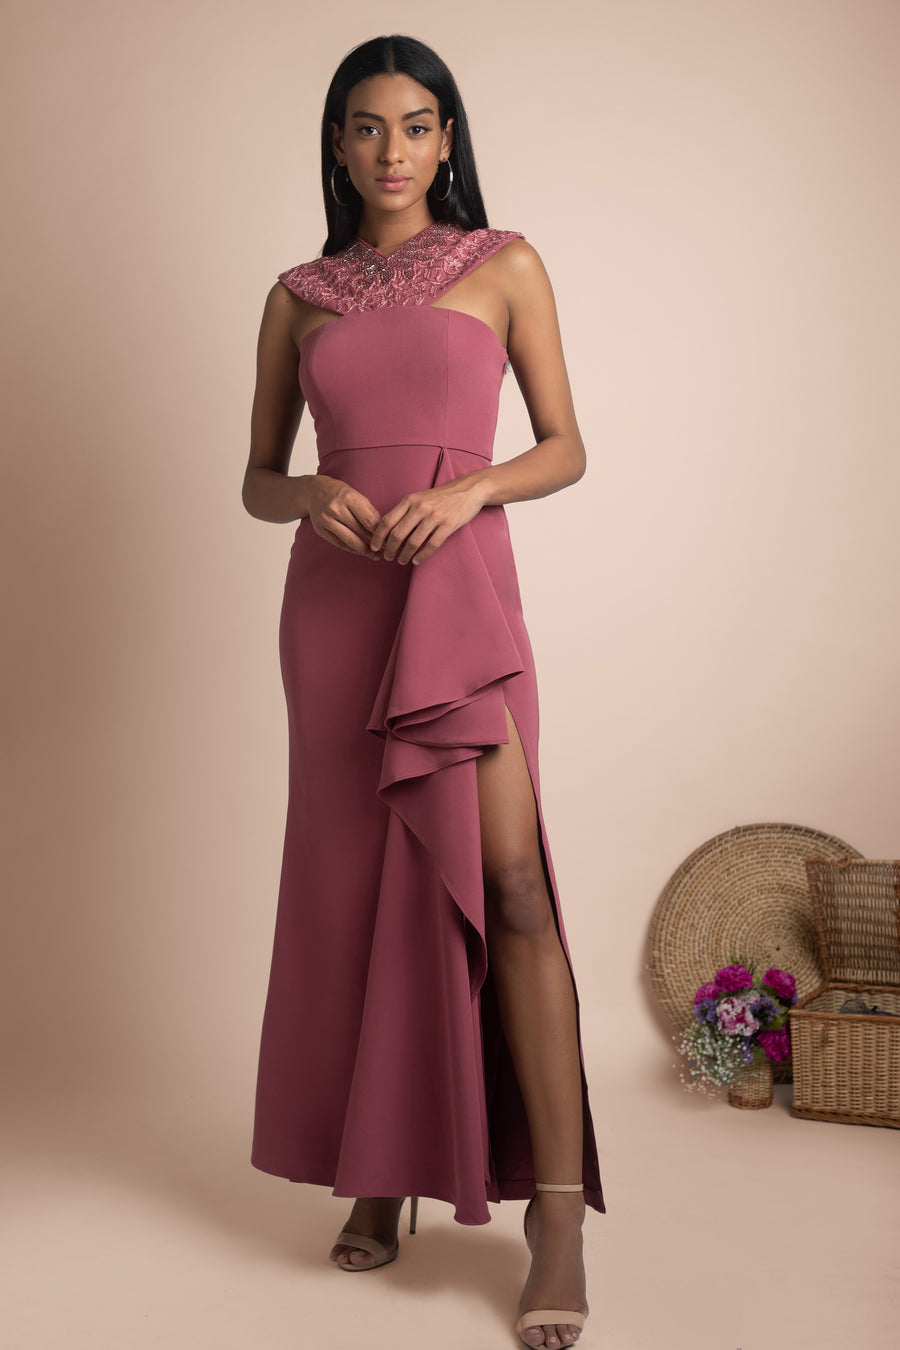 Mehak Murpana | Halter Neck Gown | Stylish formal and party wear.